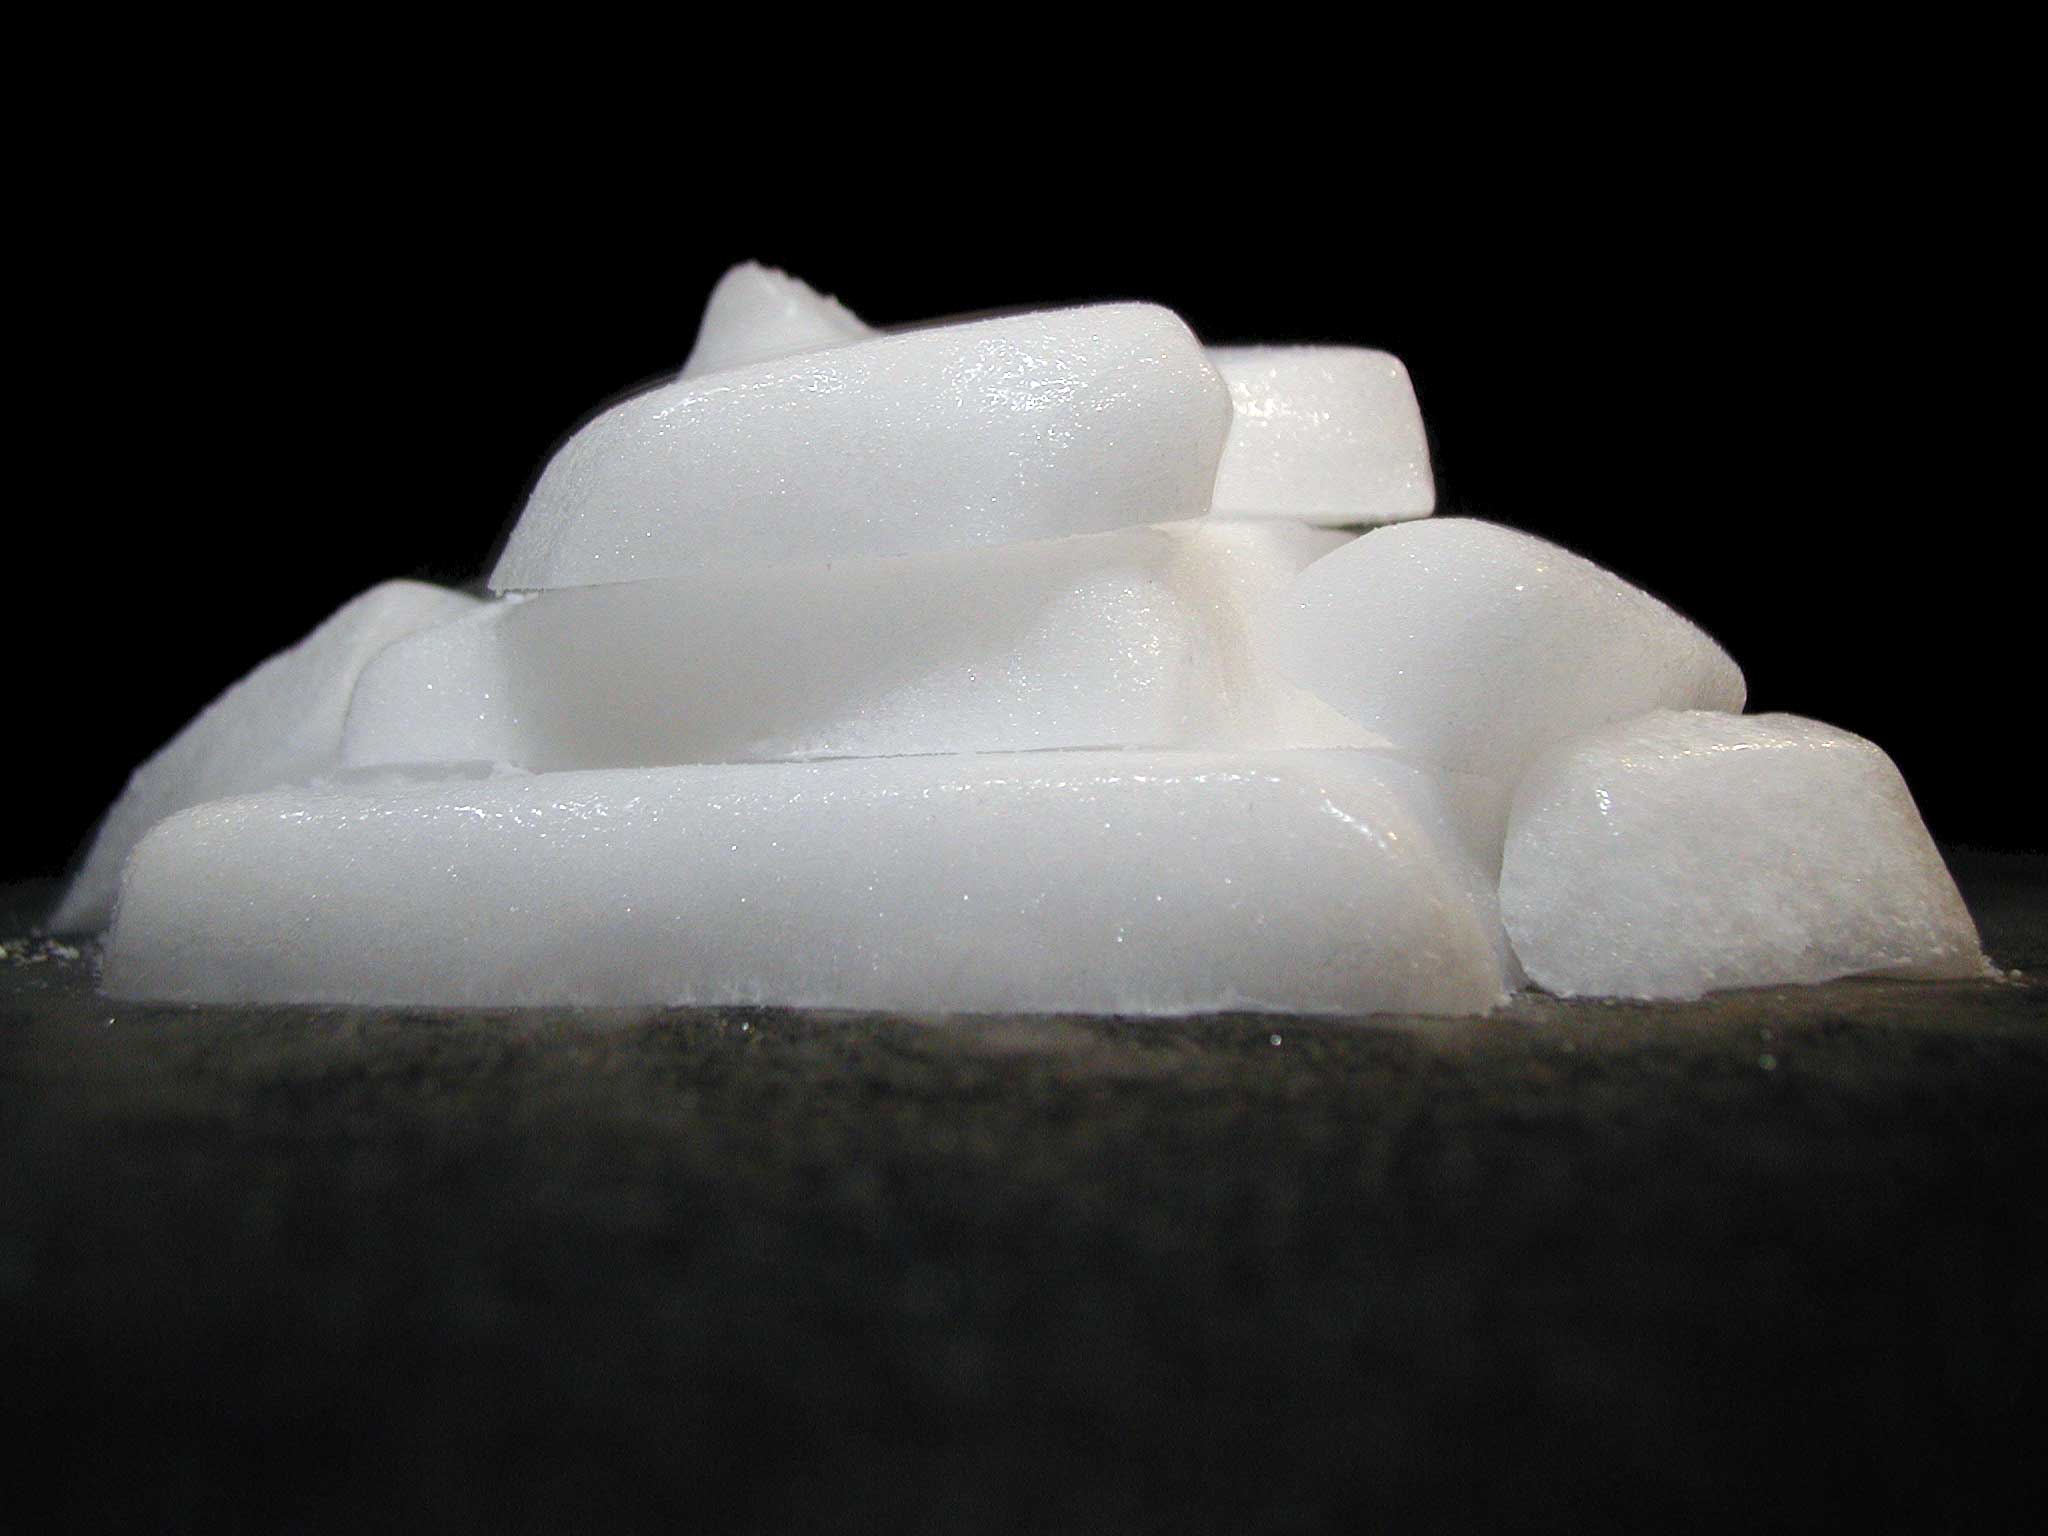 Chunks of dry ice sitting on a black surface with visible condensation